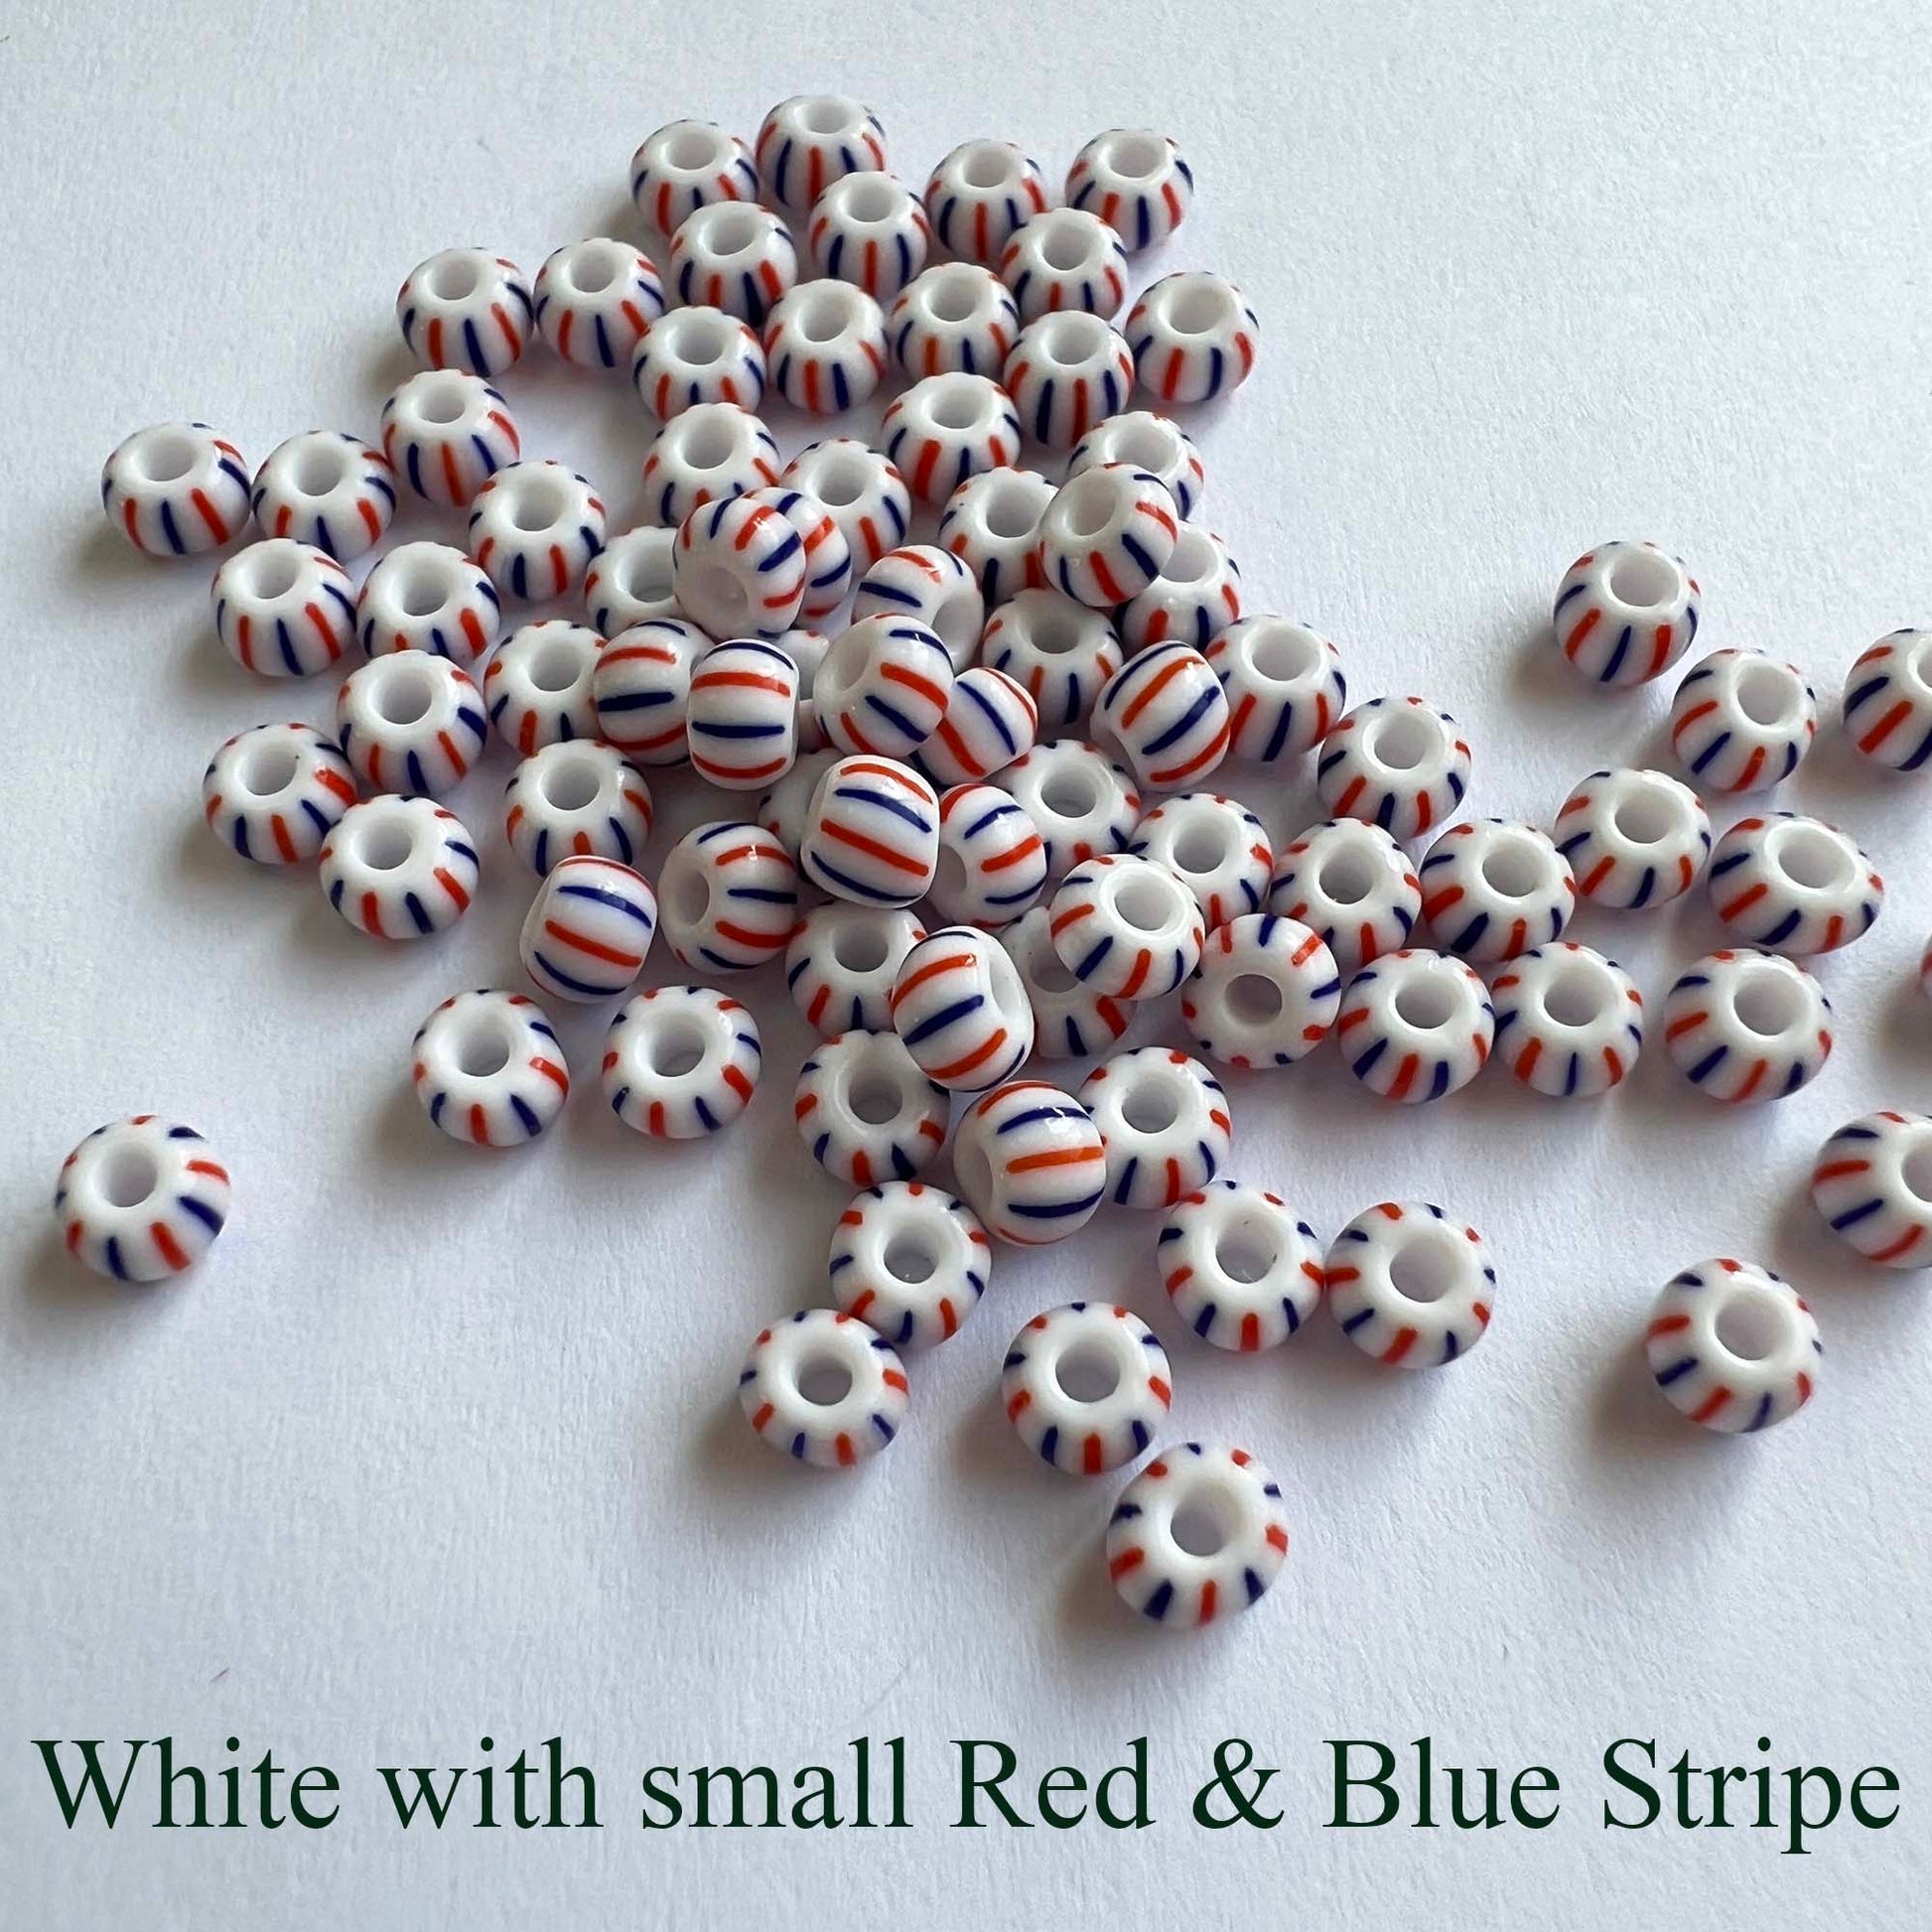 Striped Seed Beads 6/0 Small Stripe 20g Bag choose color – Bead Me A Story